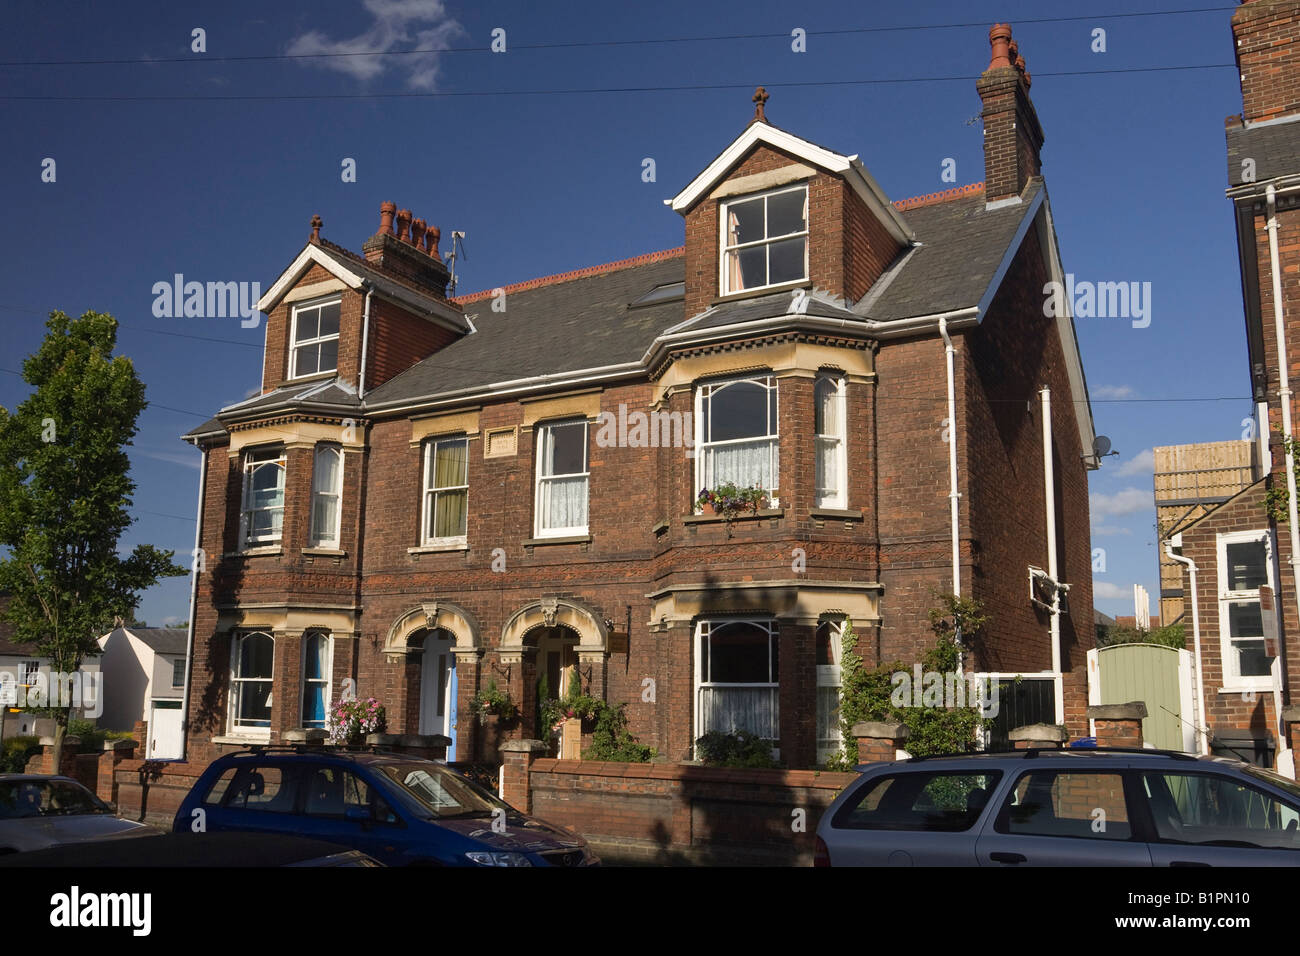 Nelson Road in Bury St Edmunds, UK,  house built in 1902 Stock Photo